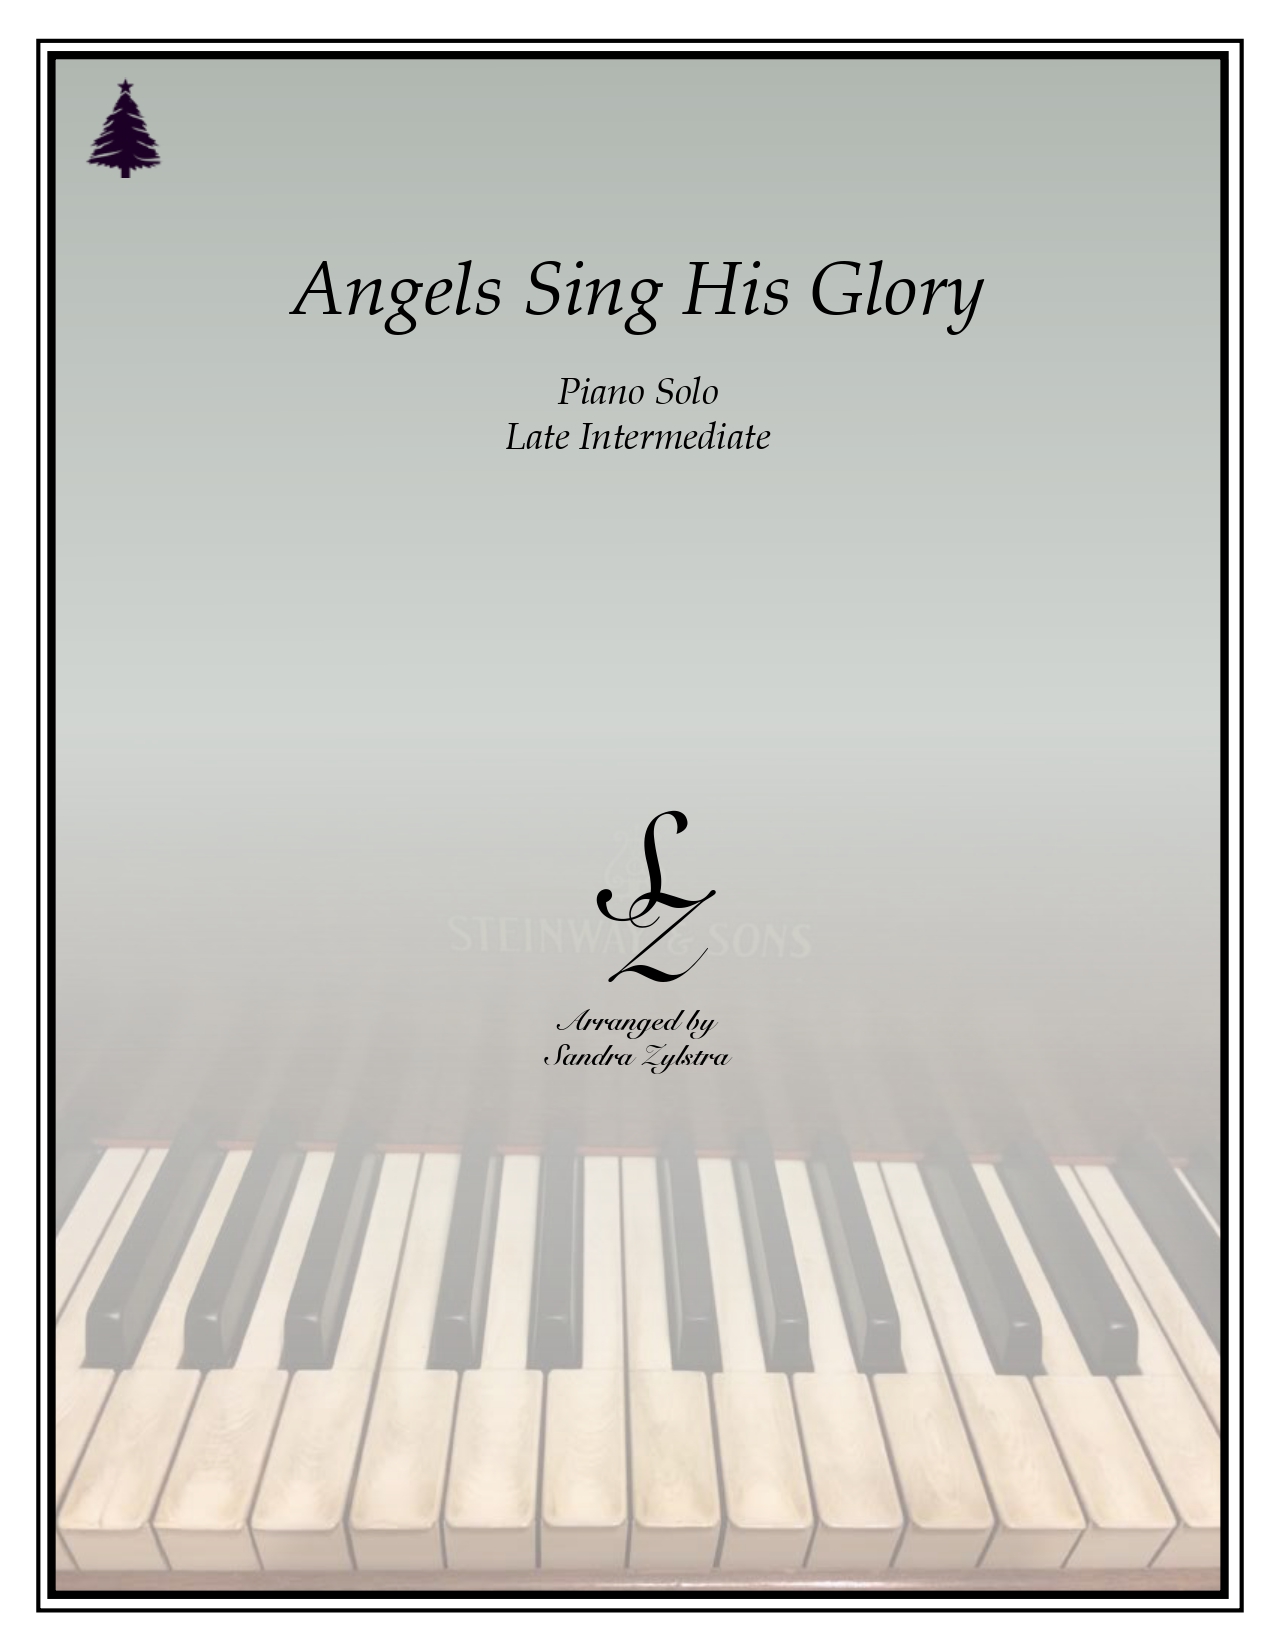 Angels Sing His Glory late intermediate piano cover page 00011